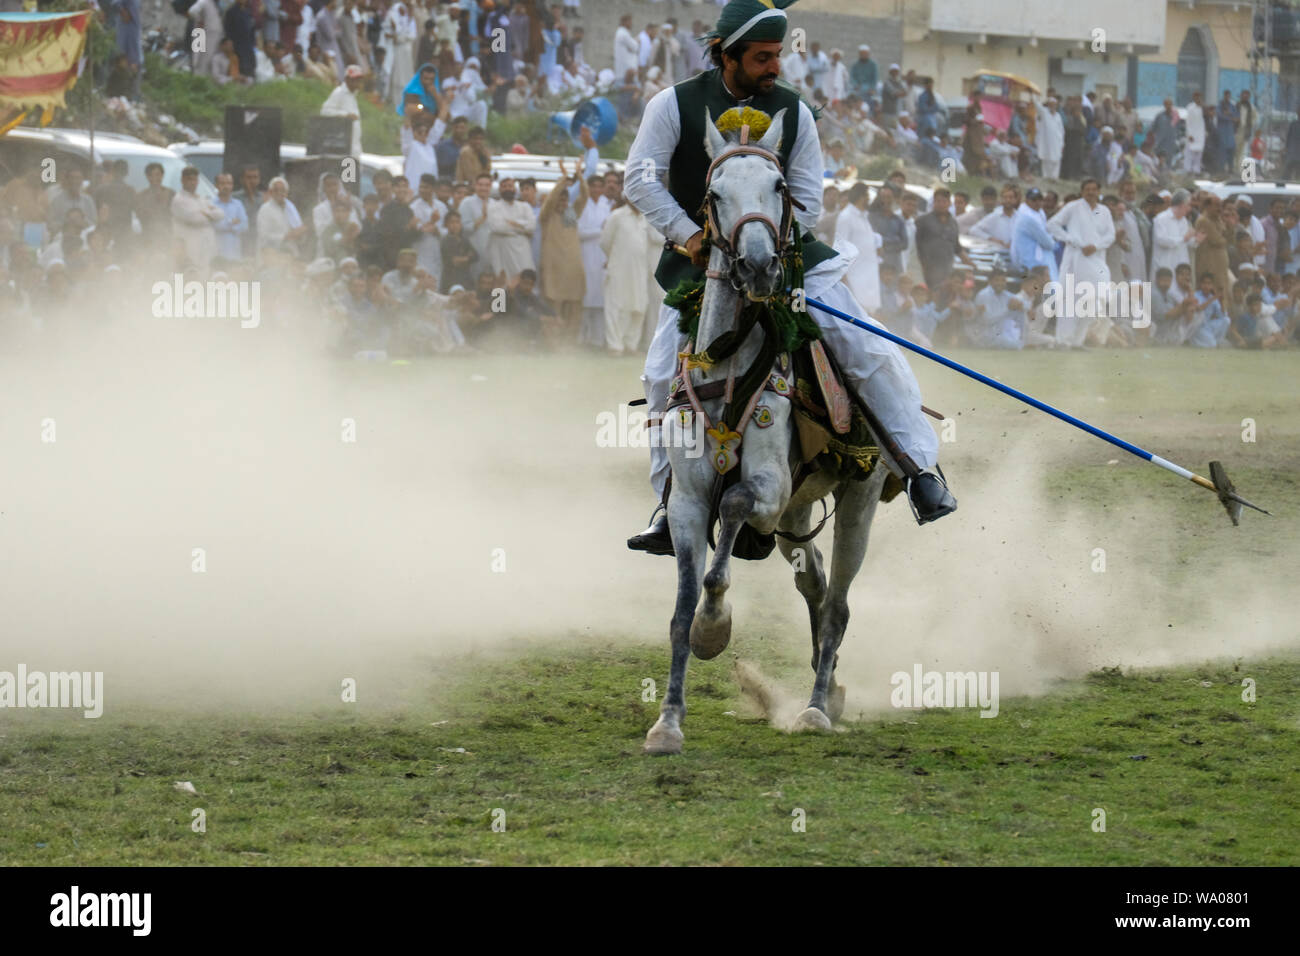 Tent Pegging horse rider while acheiving the ground target at cultural festival Pakistan. Stock Photo